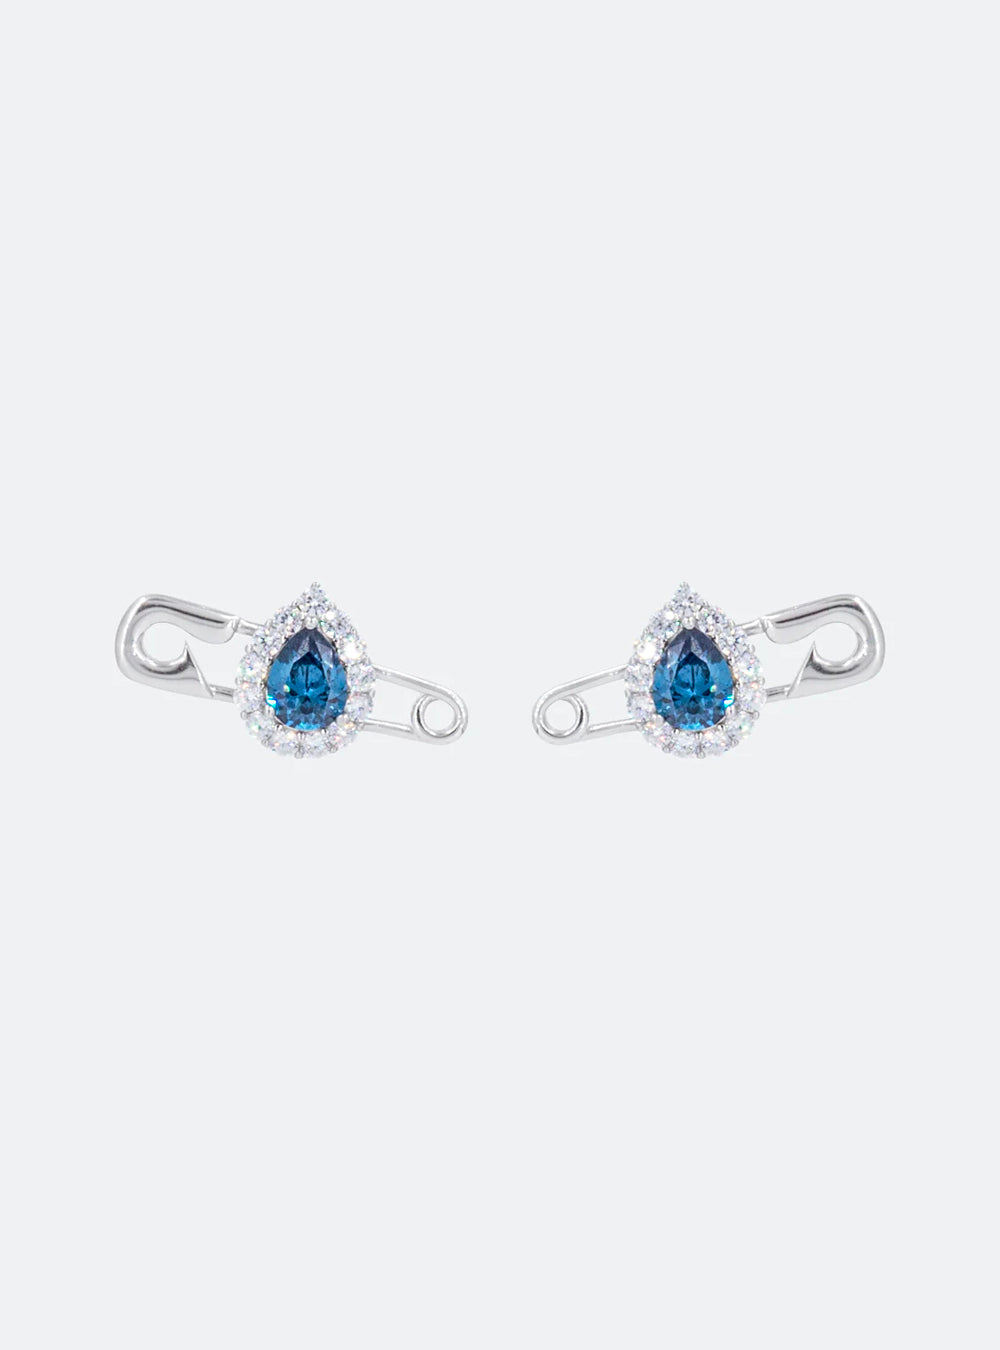 A pair of MIDNIGHTFACTORY Cocktail safety-pin earrings with blue and white diamonds.